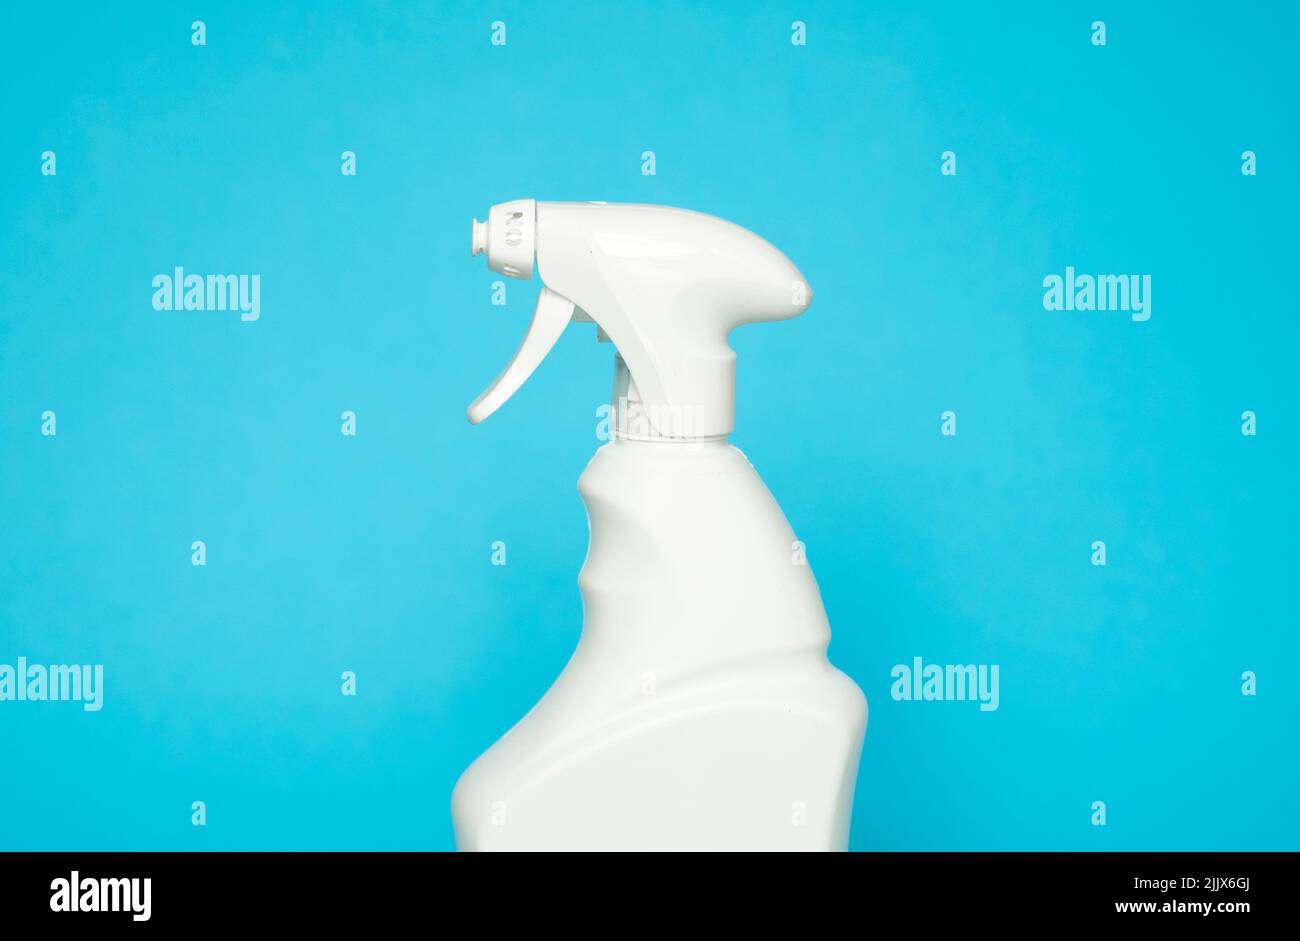 White blank plastic spray detergent bottle isolated on blue background. Packaging template mockup. Stock Photo